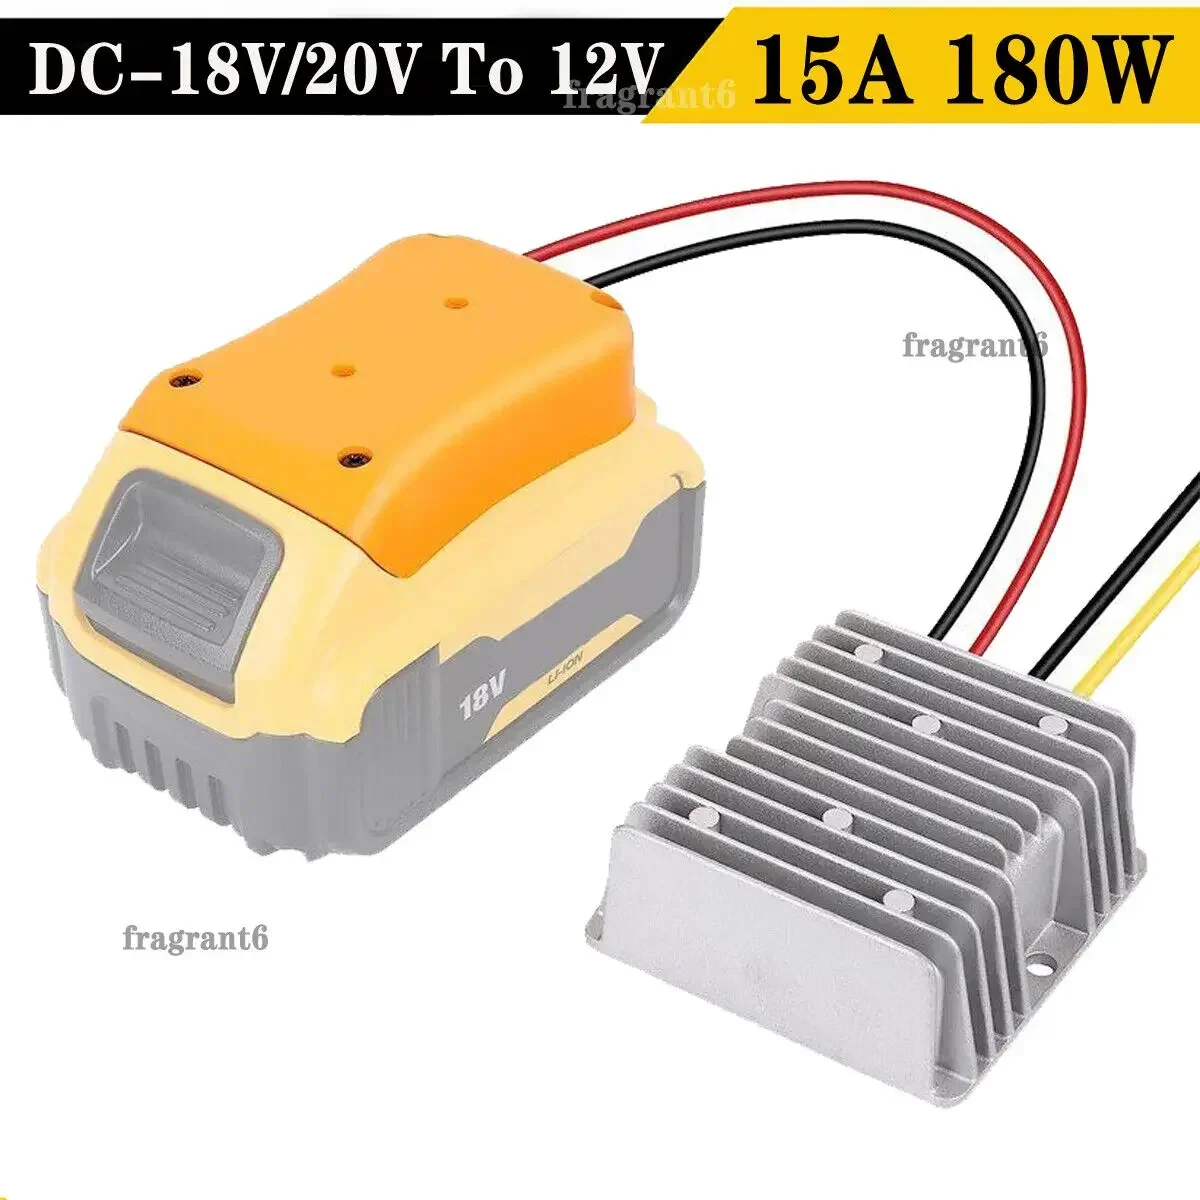 Step Down Converter 20V To 12V Adapter for Dewalt 20V Li-ion Battery 15A 180W Adapter Automatic Buck Boost Converter Regulator 12v6a full automatic car battery recharge device